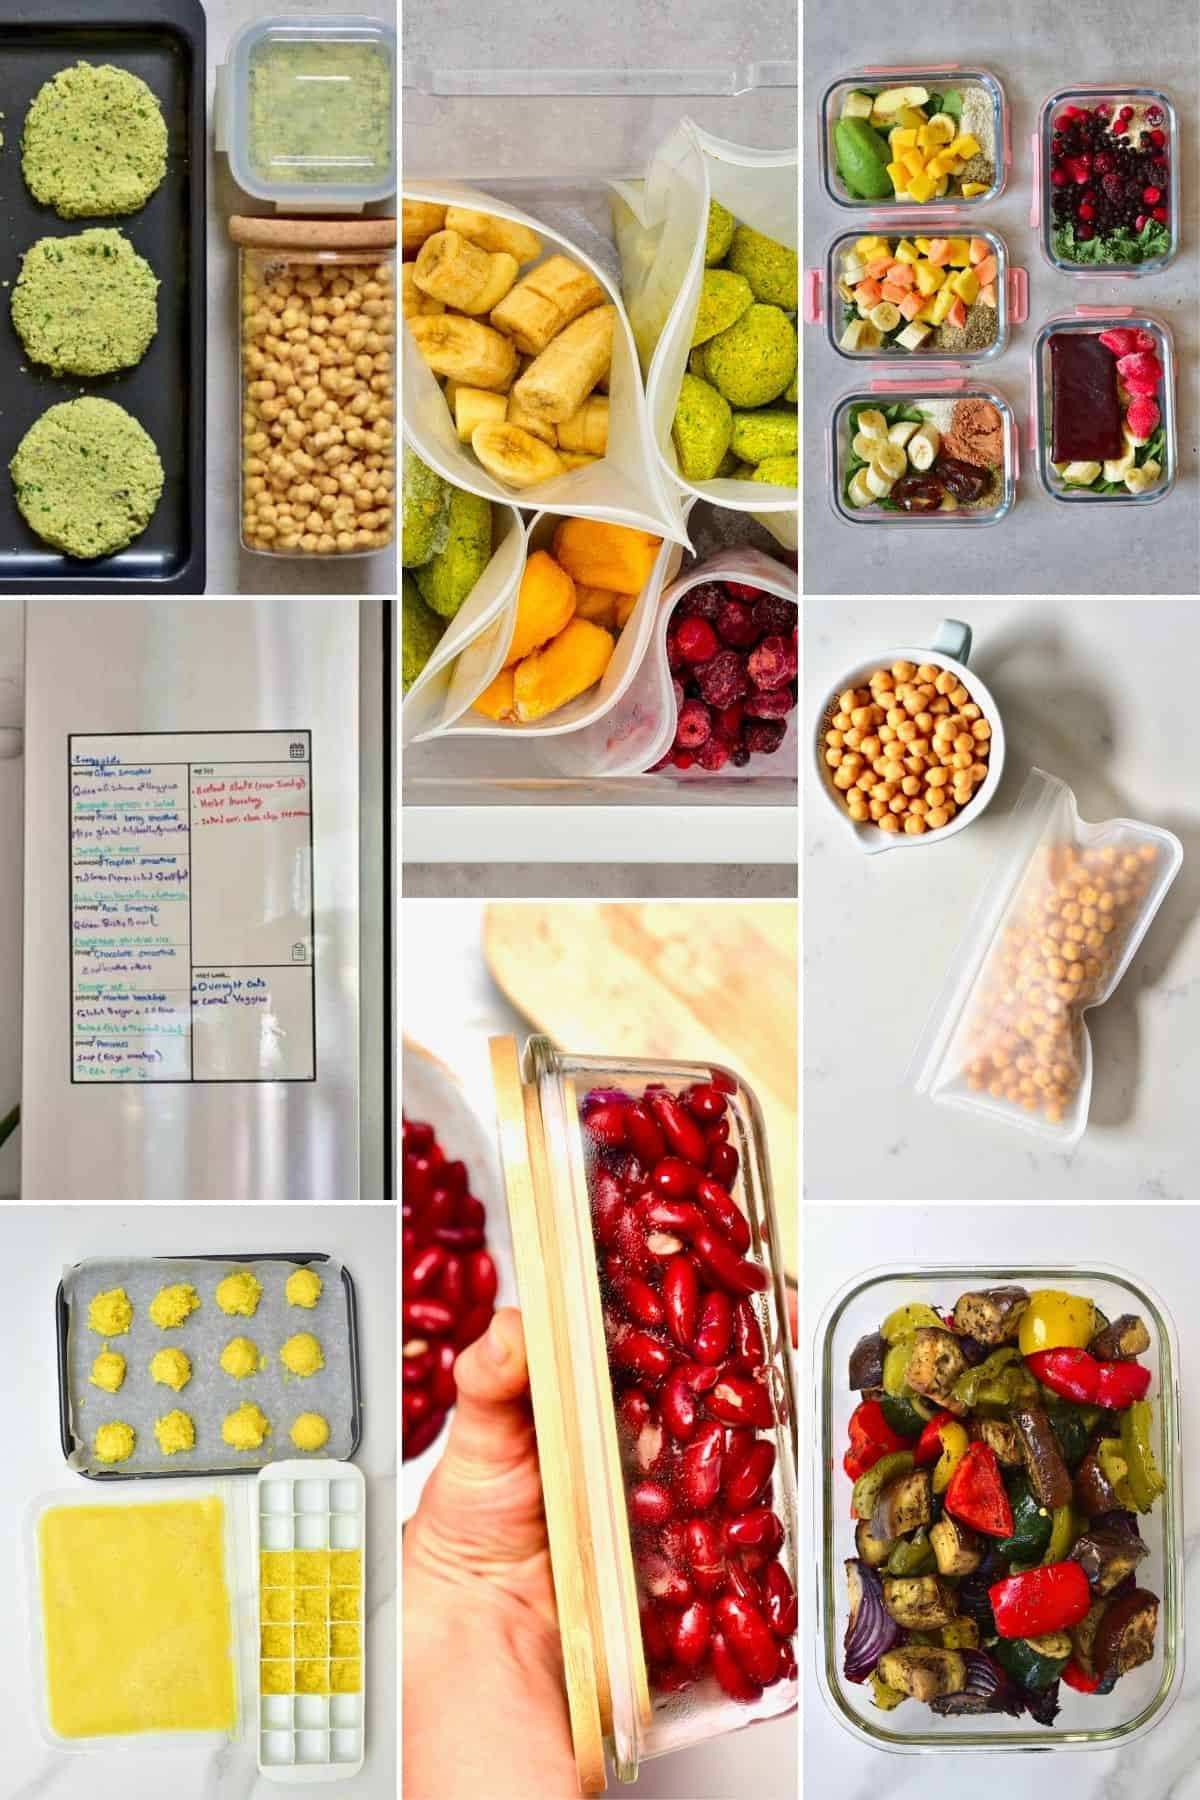 Meal Prepping Made Easy in 4 Simple Steps - Apex MD